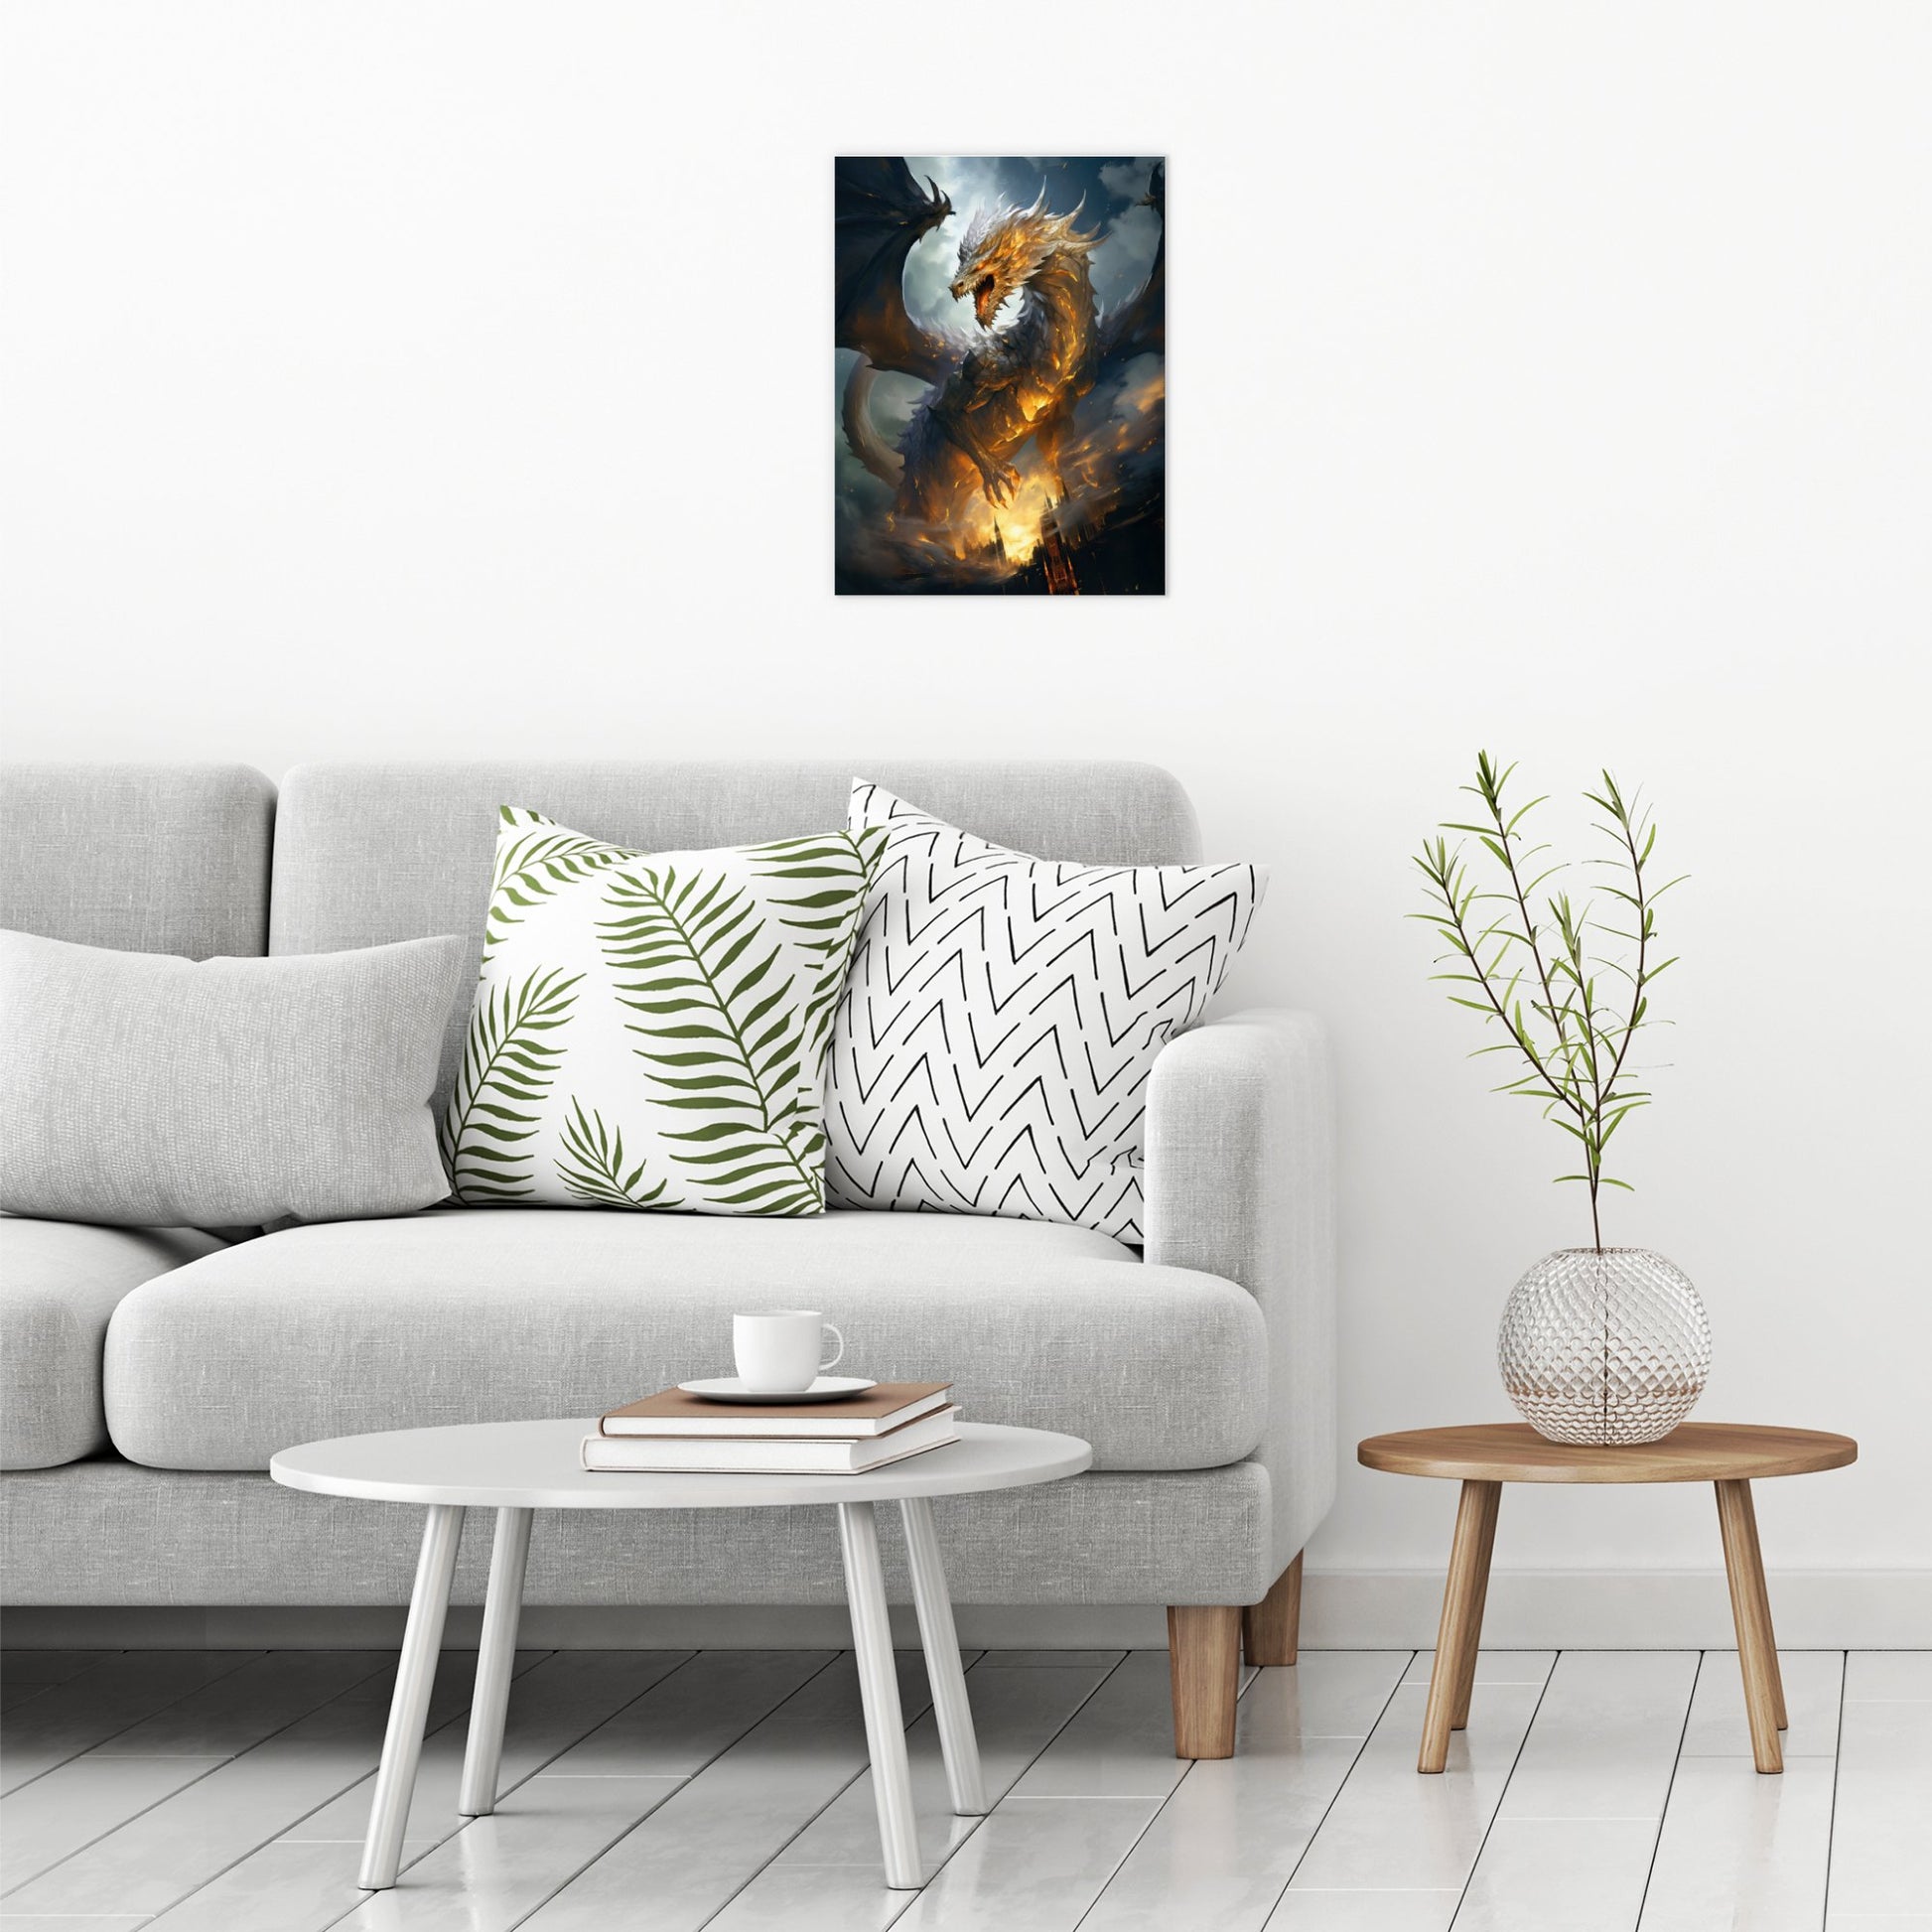 A contemporary modern room view showing a medium size metal art poster display plate with printed design of a Golden Dragon Fantasy Painting